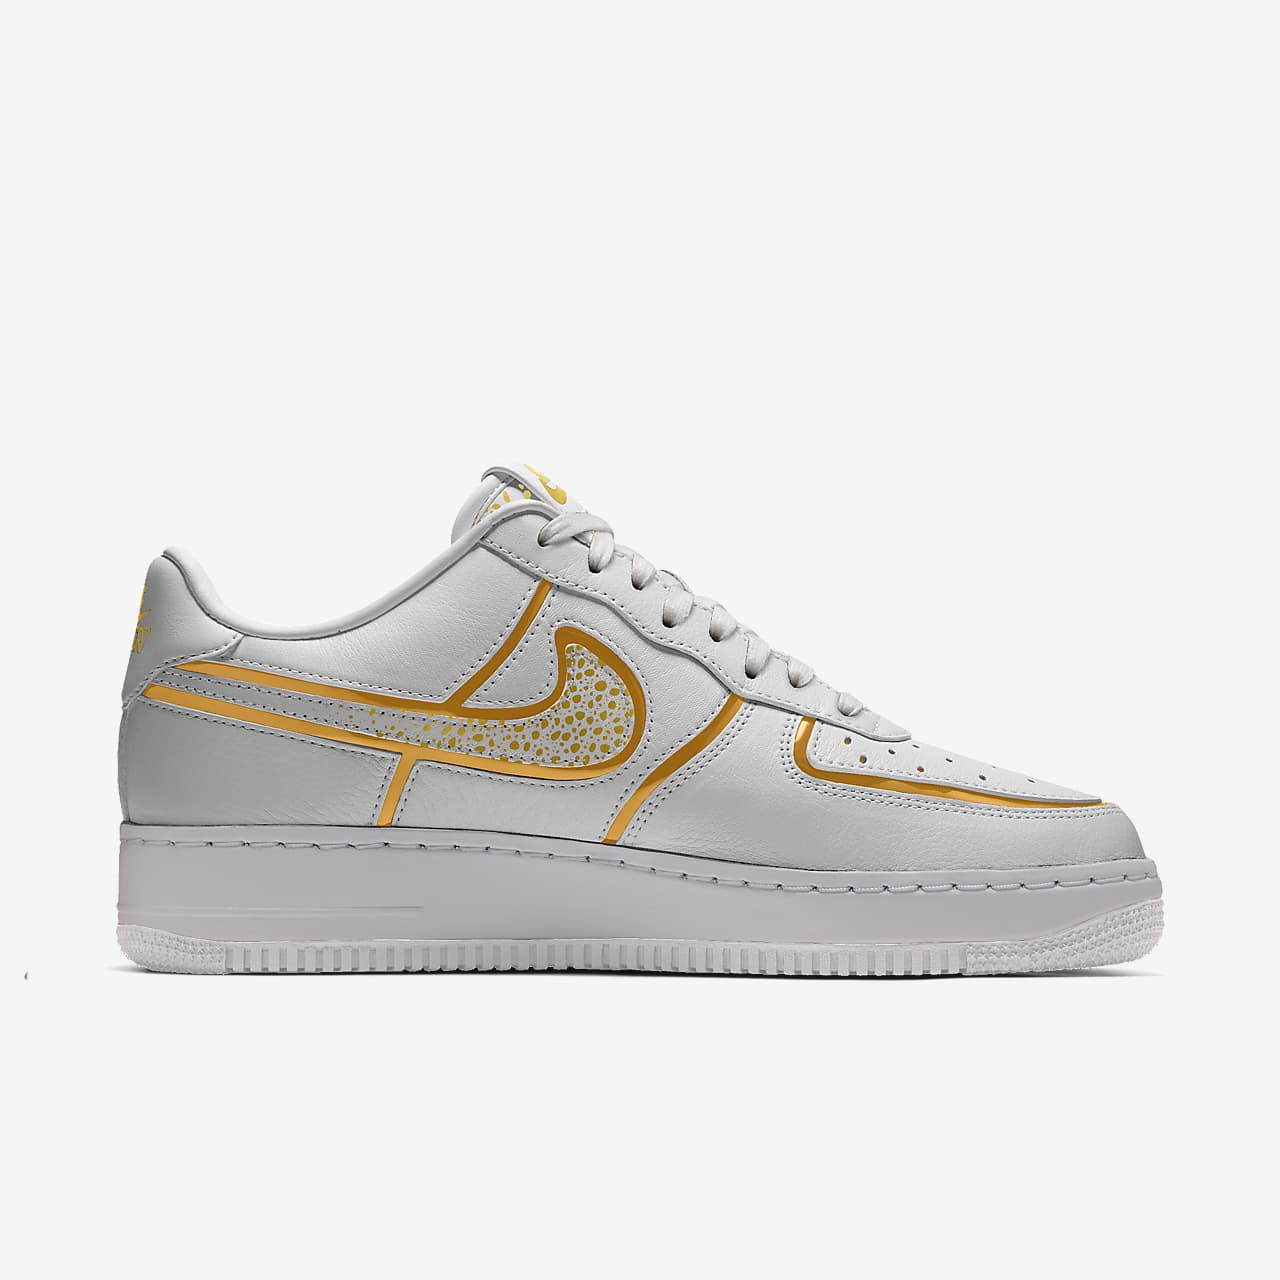 Nike Air Force 1 Low CR7 - White/Gold 